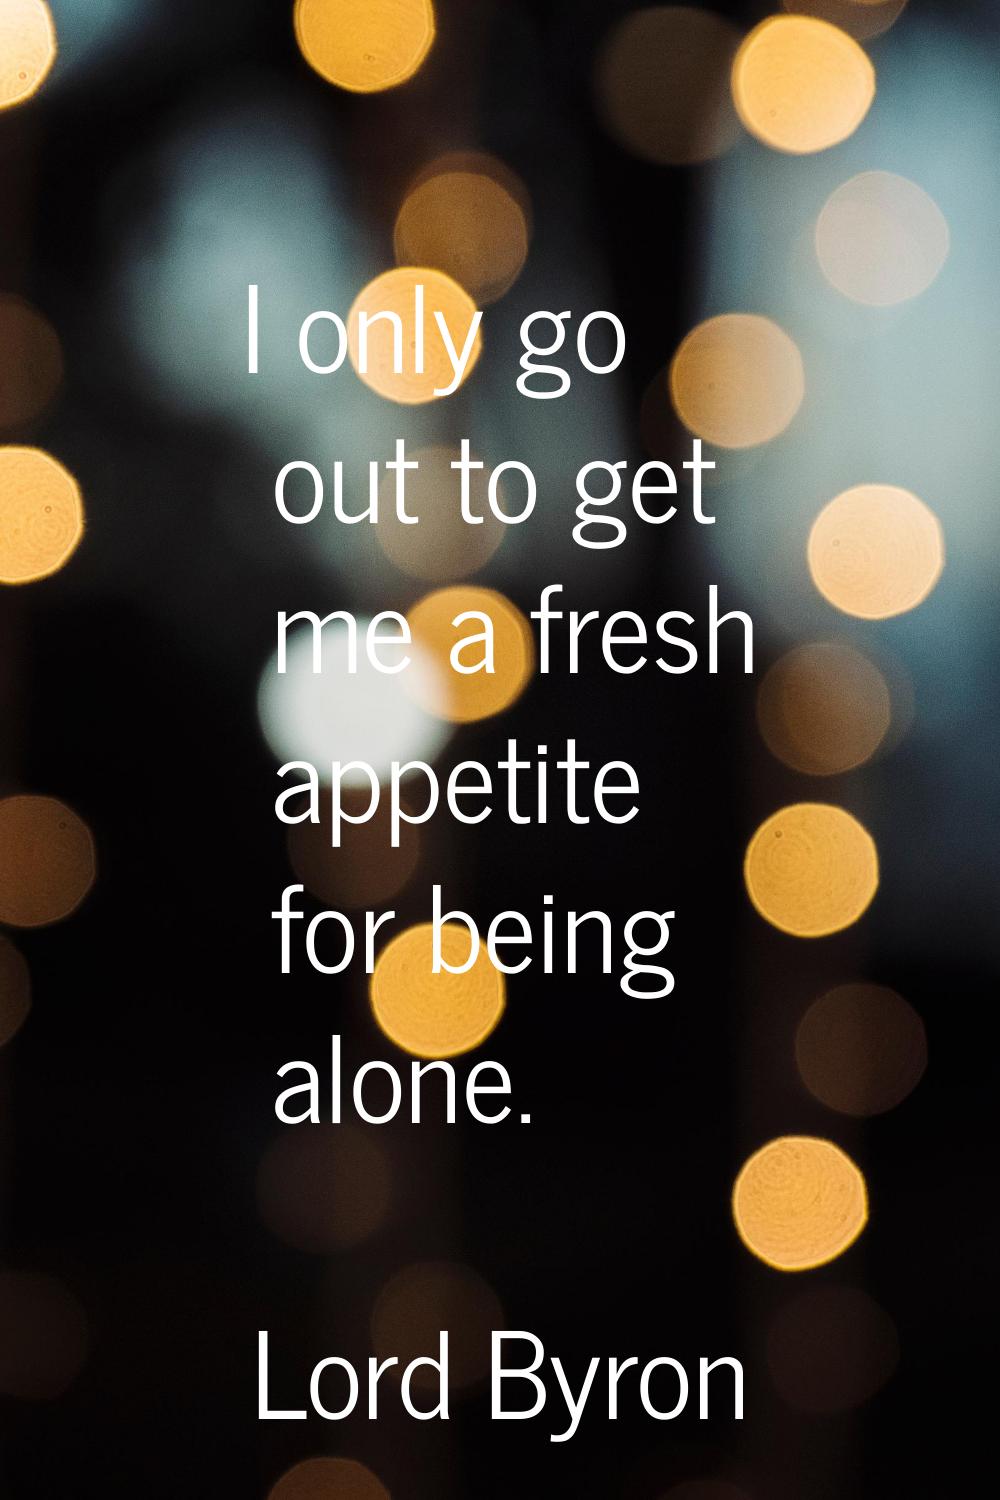 I only go out to get me a fresh appetite for being alone.